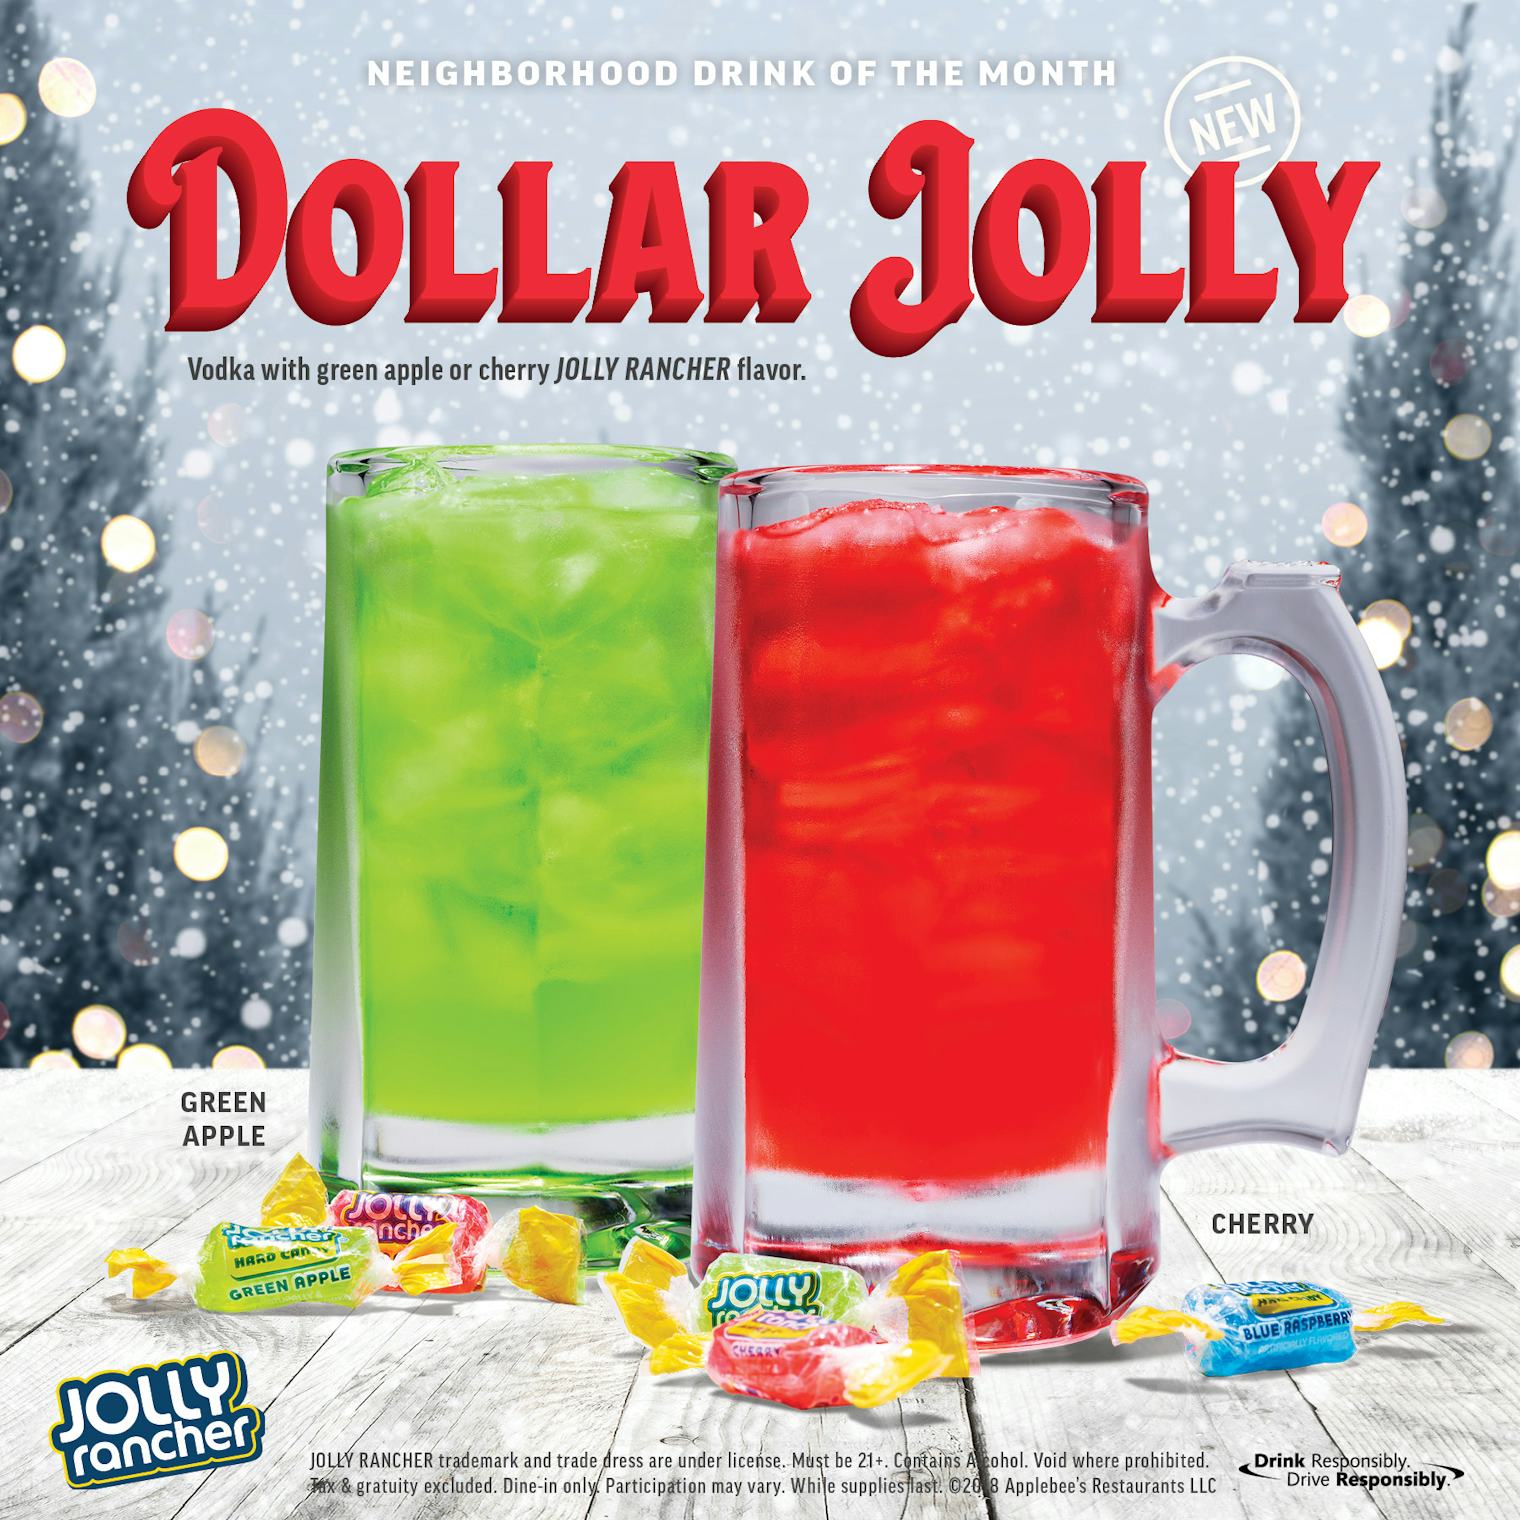 Applebee's Dollar Jolly Is The Neighborhood Drink Of The Month For December & It Comes In 2 Flavors